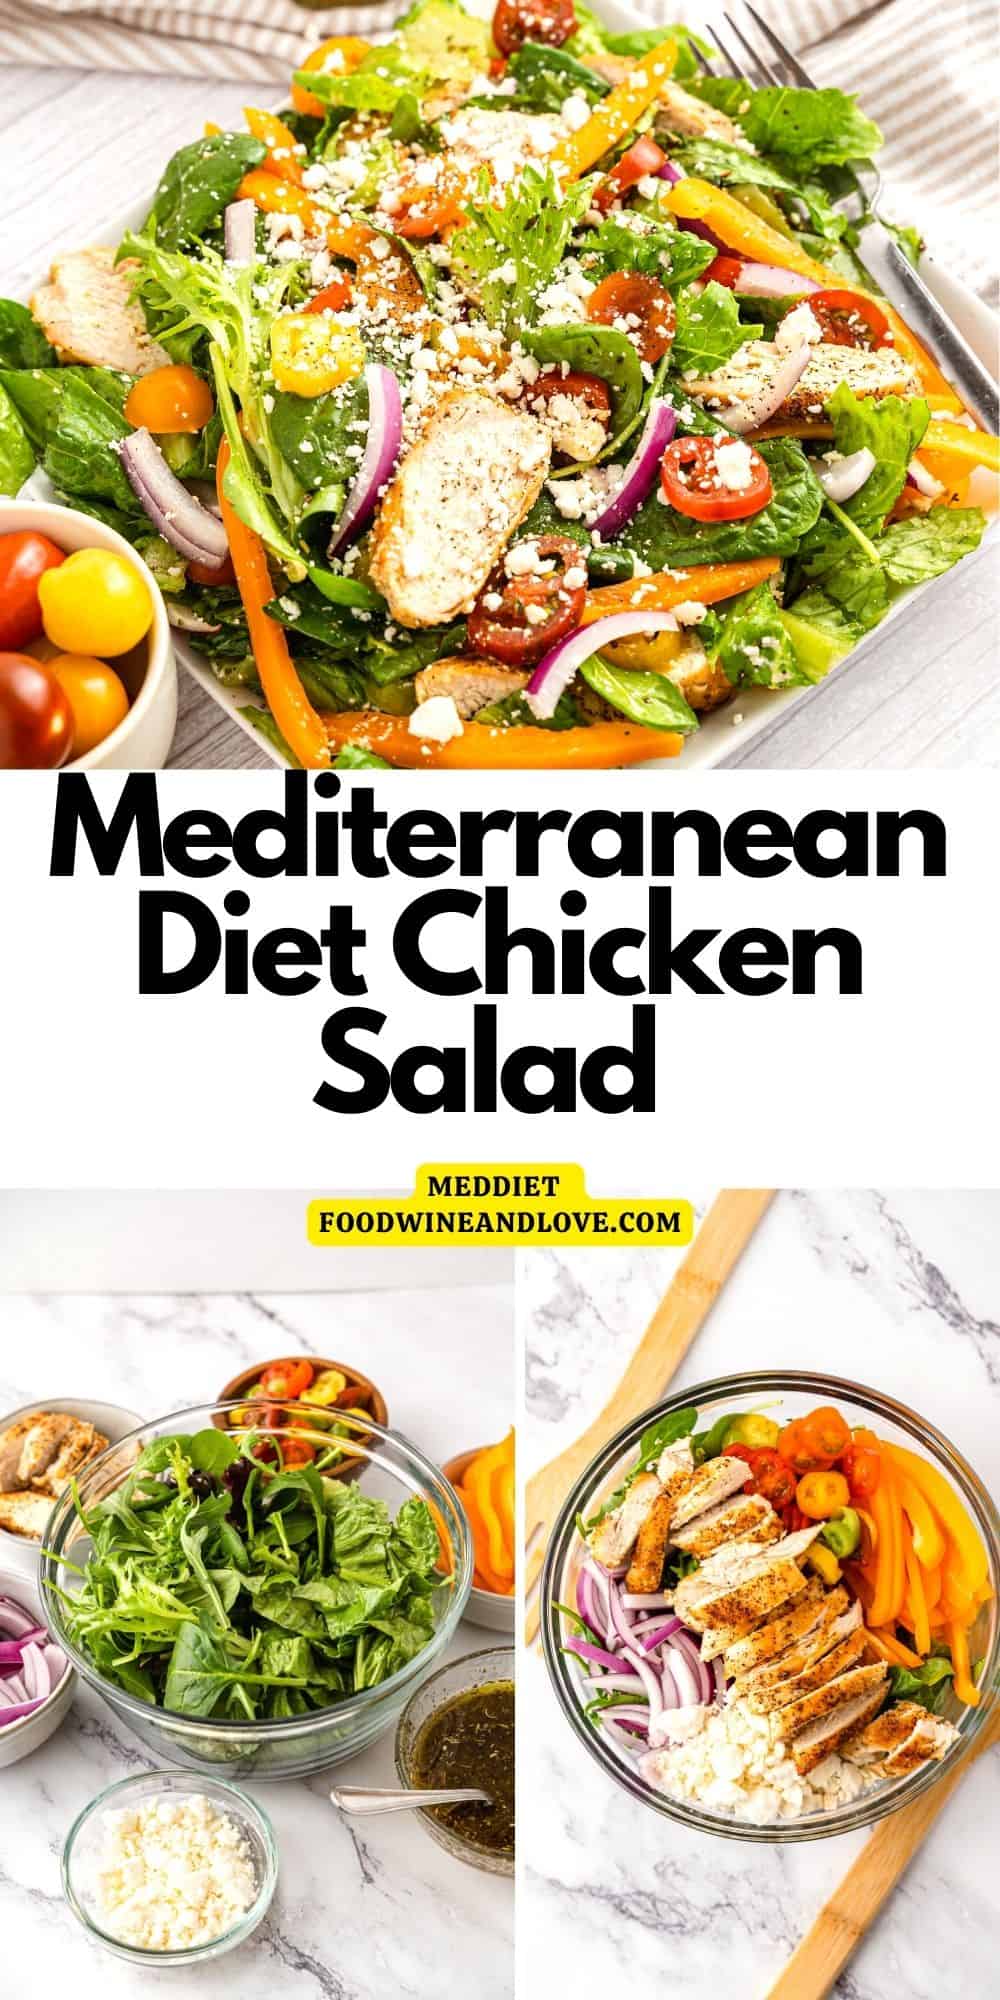 Mediterranean Diet Chicken Salad, a simple and delicious recipe made with healthy ingredients and a homemade lemon vinaigrette dressing.